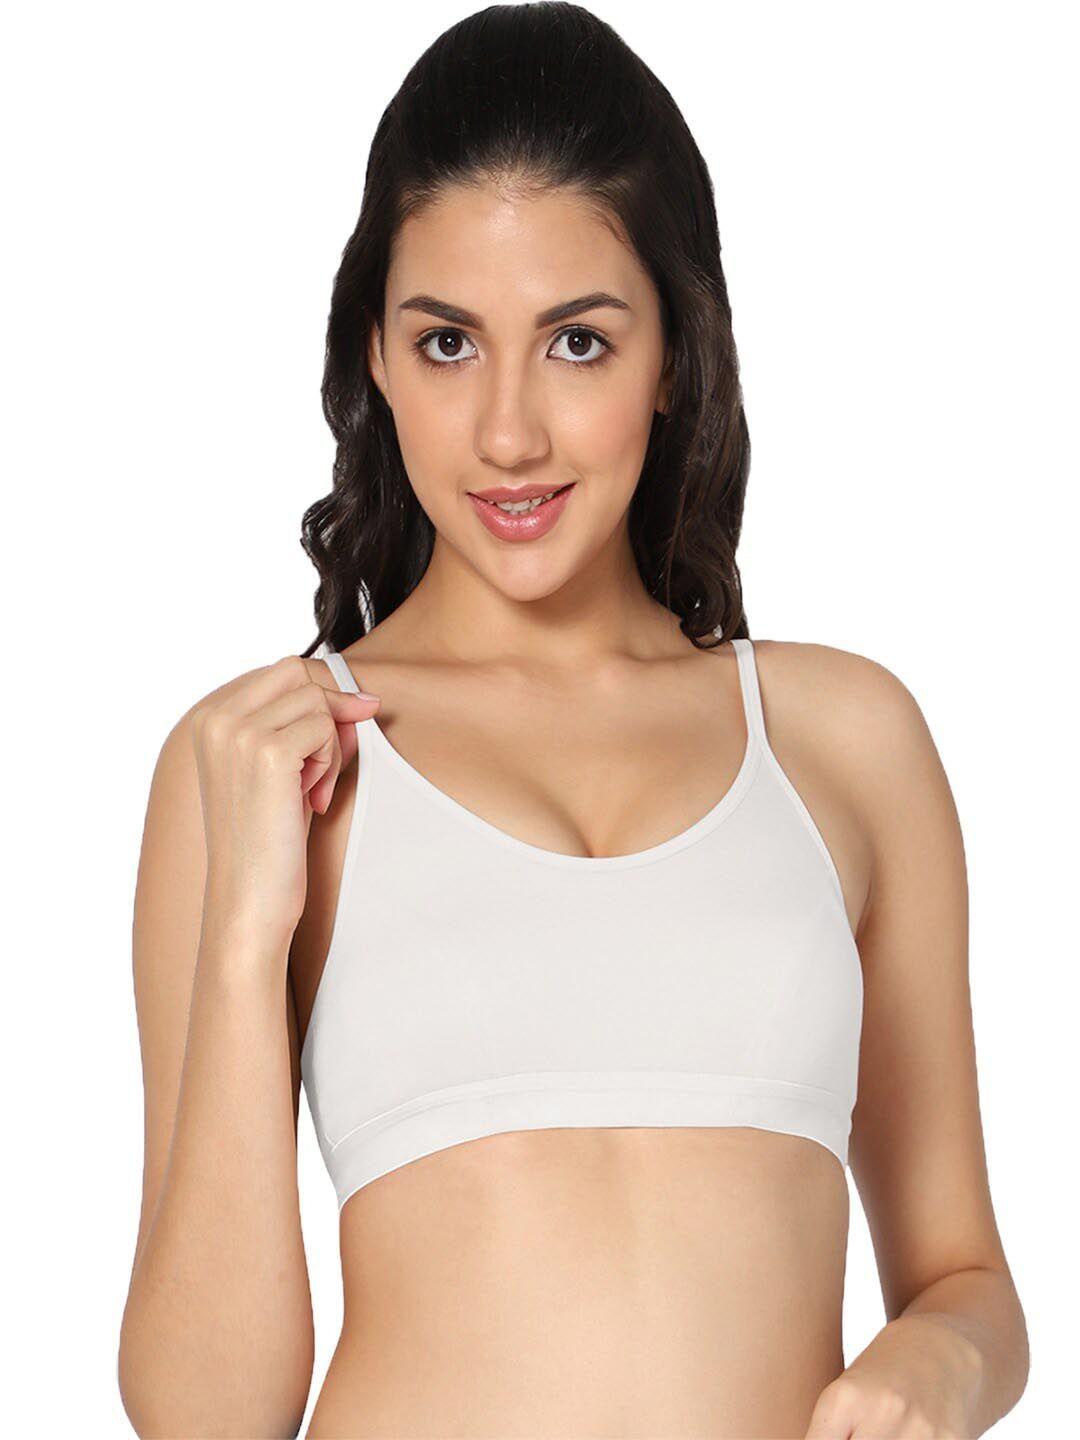 in-care-full-coverage-all-day-comfort-non-padded-non-wired-cotton-workout-sports-bra